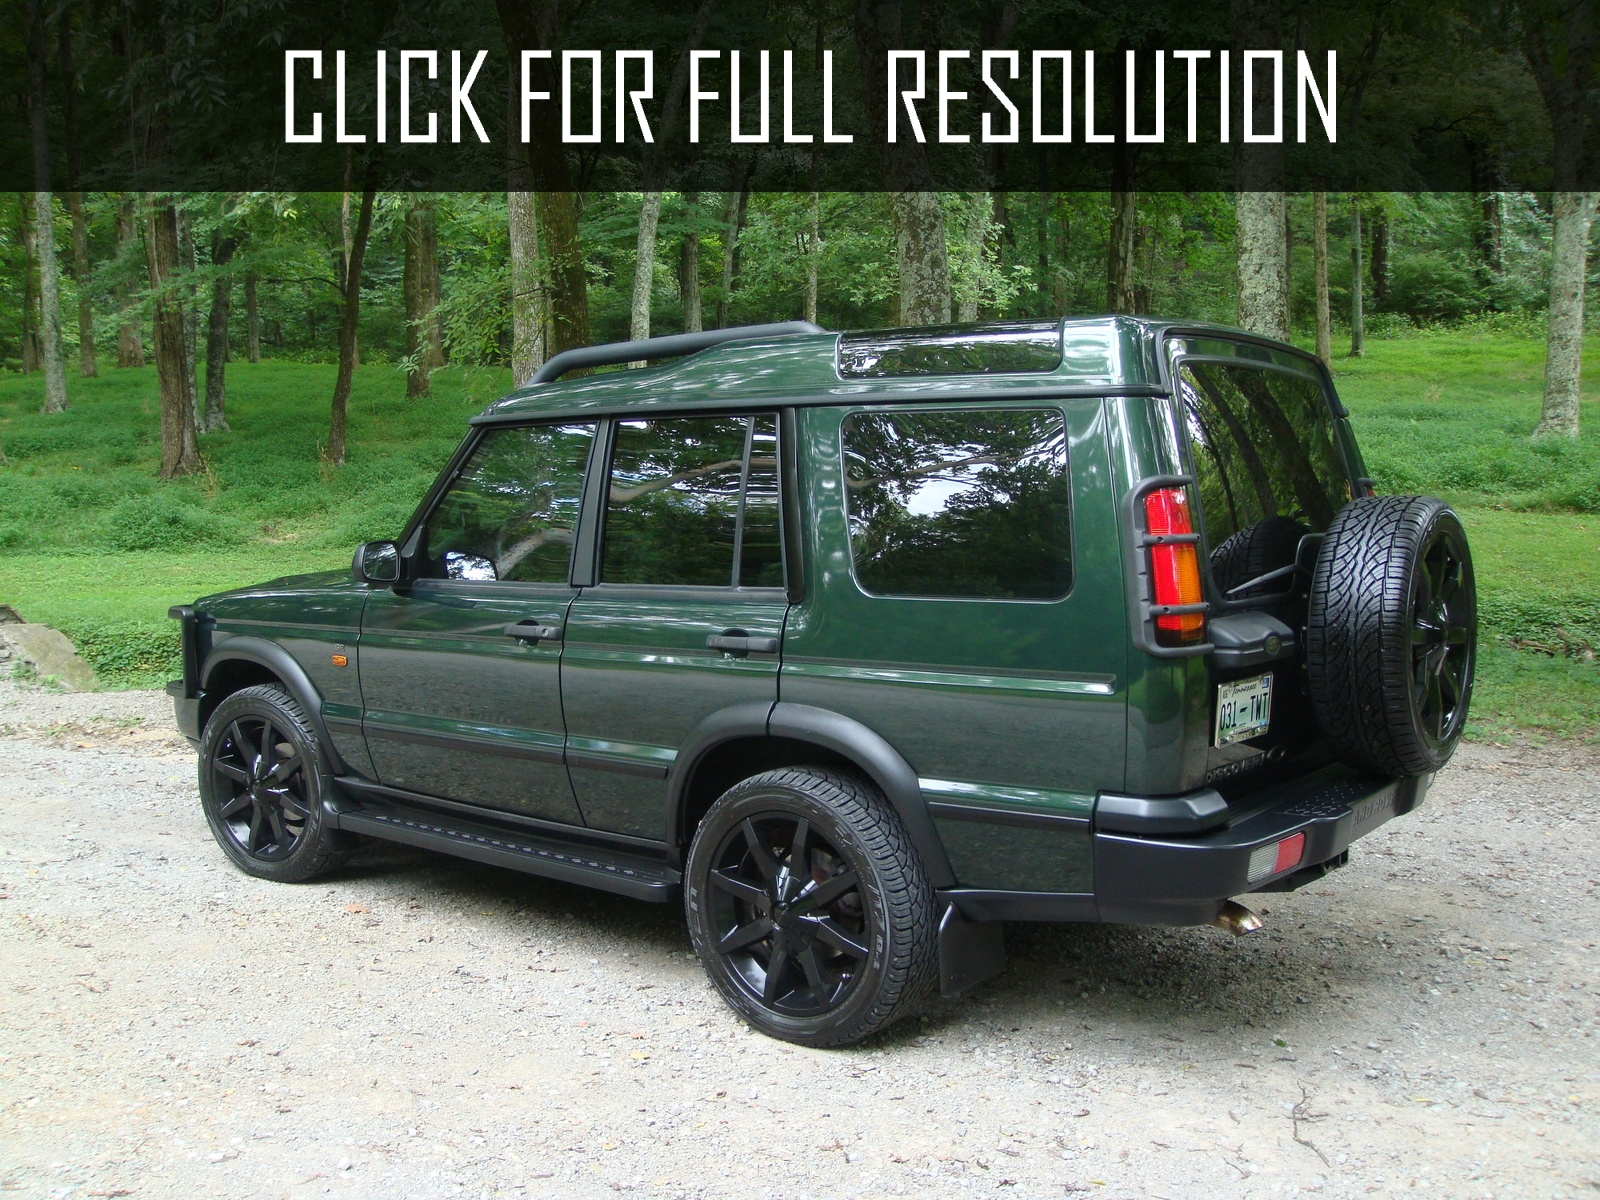 1999 Land Rover Discovery 2 news, reviews, msrp, ratings